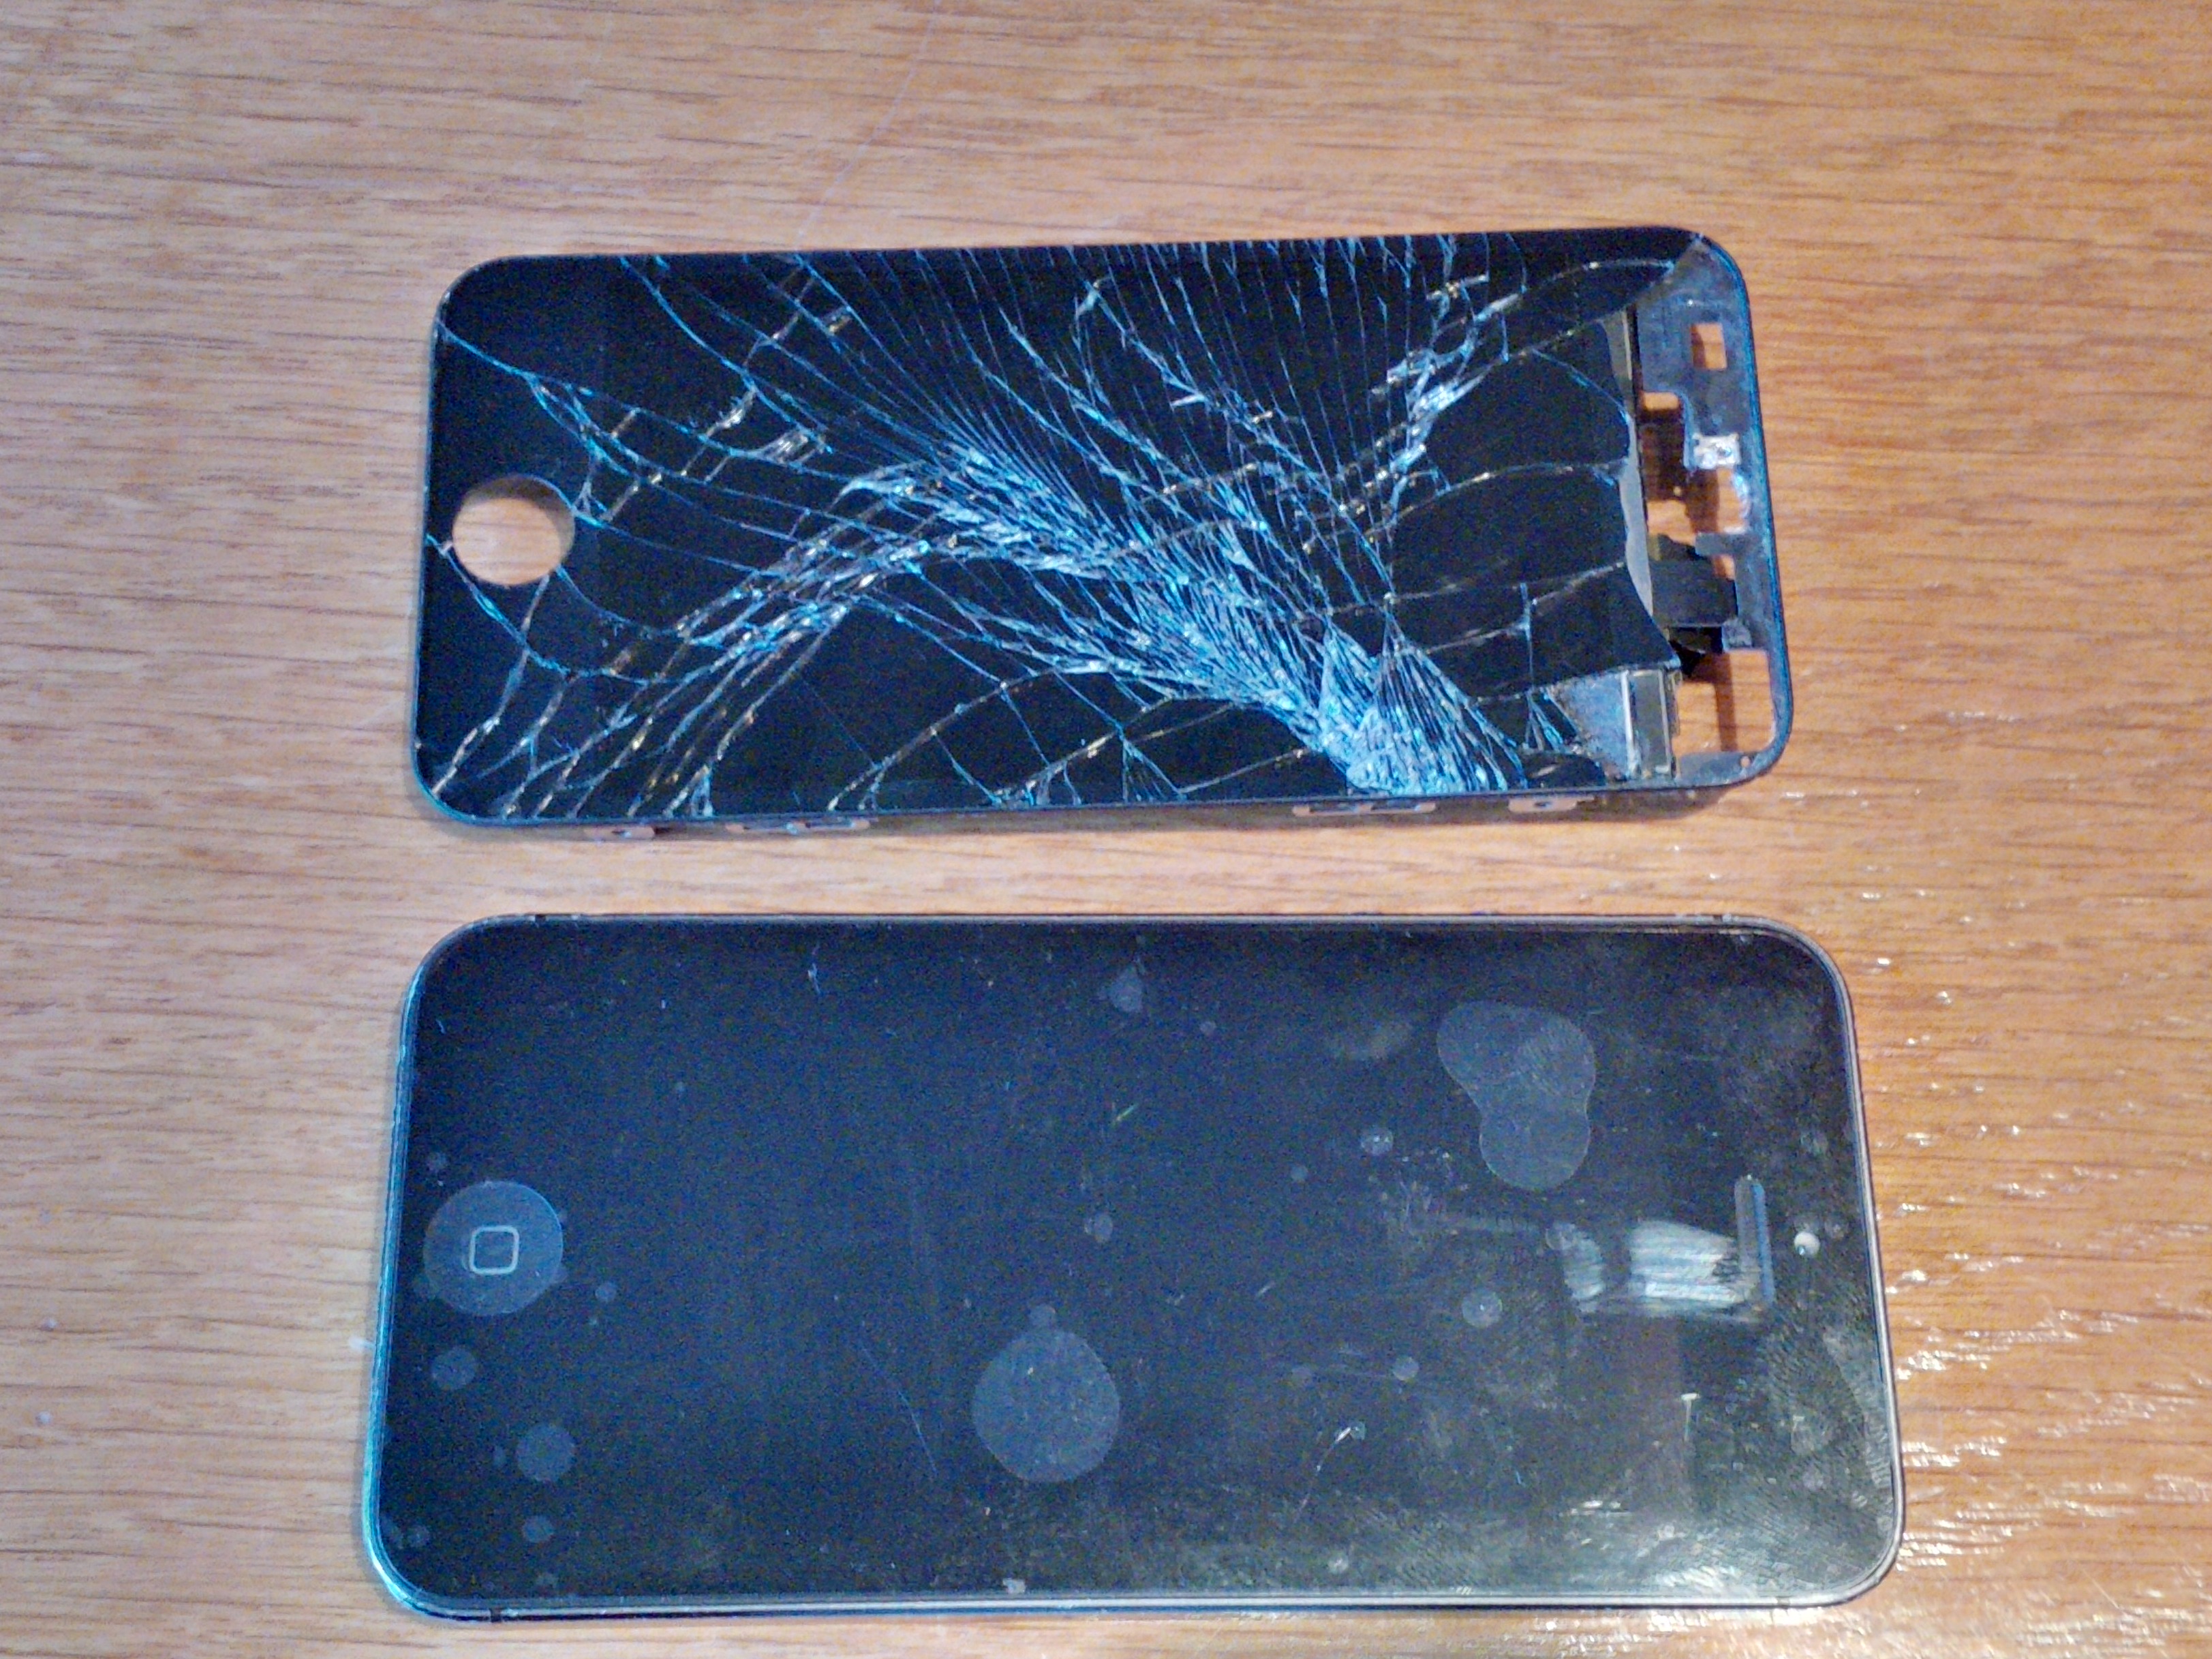 iPhone5 repaired with old broken screen